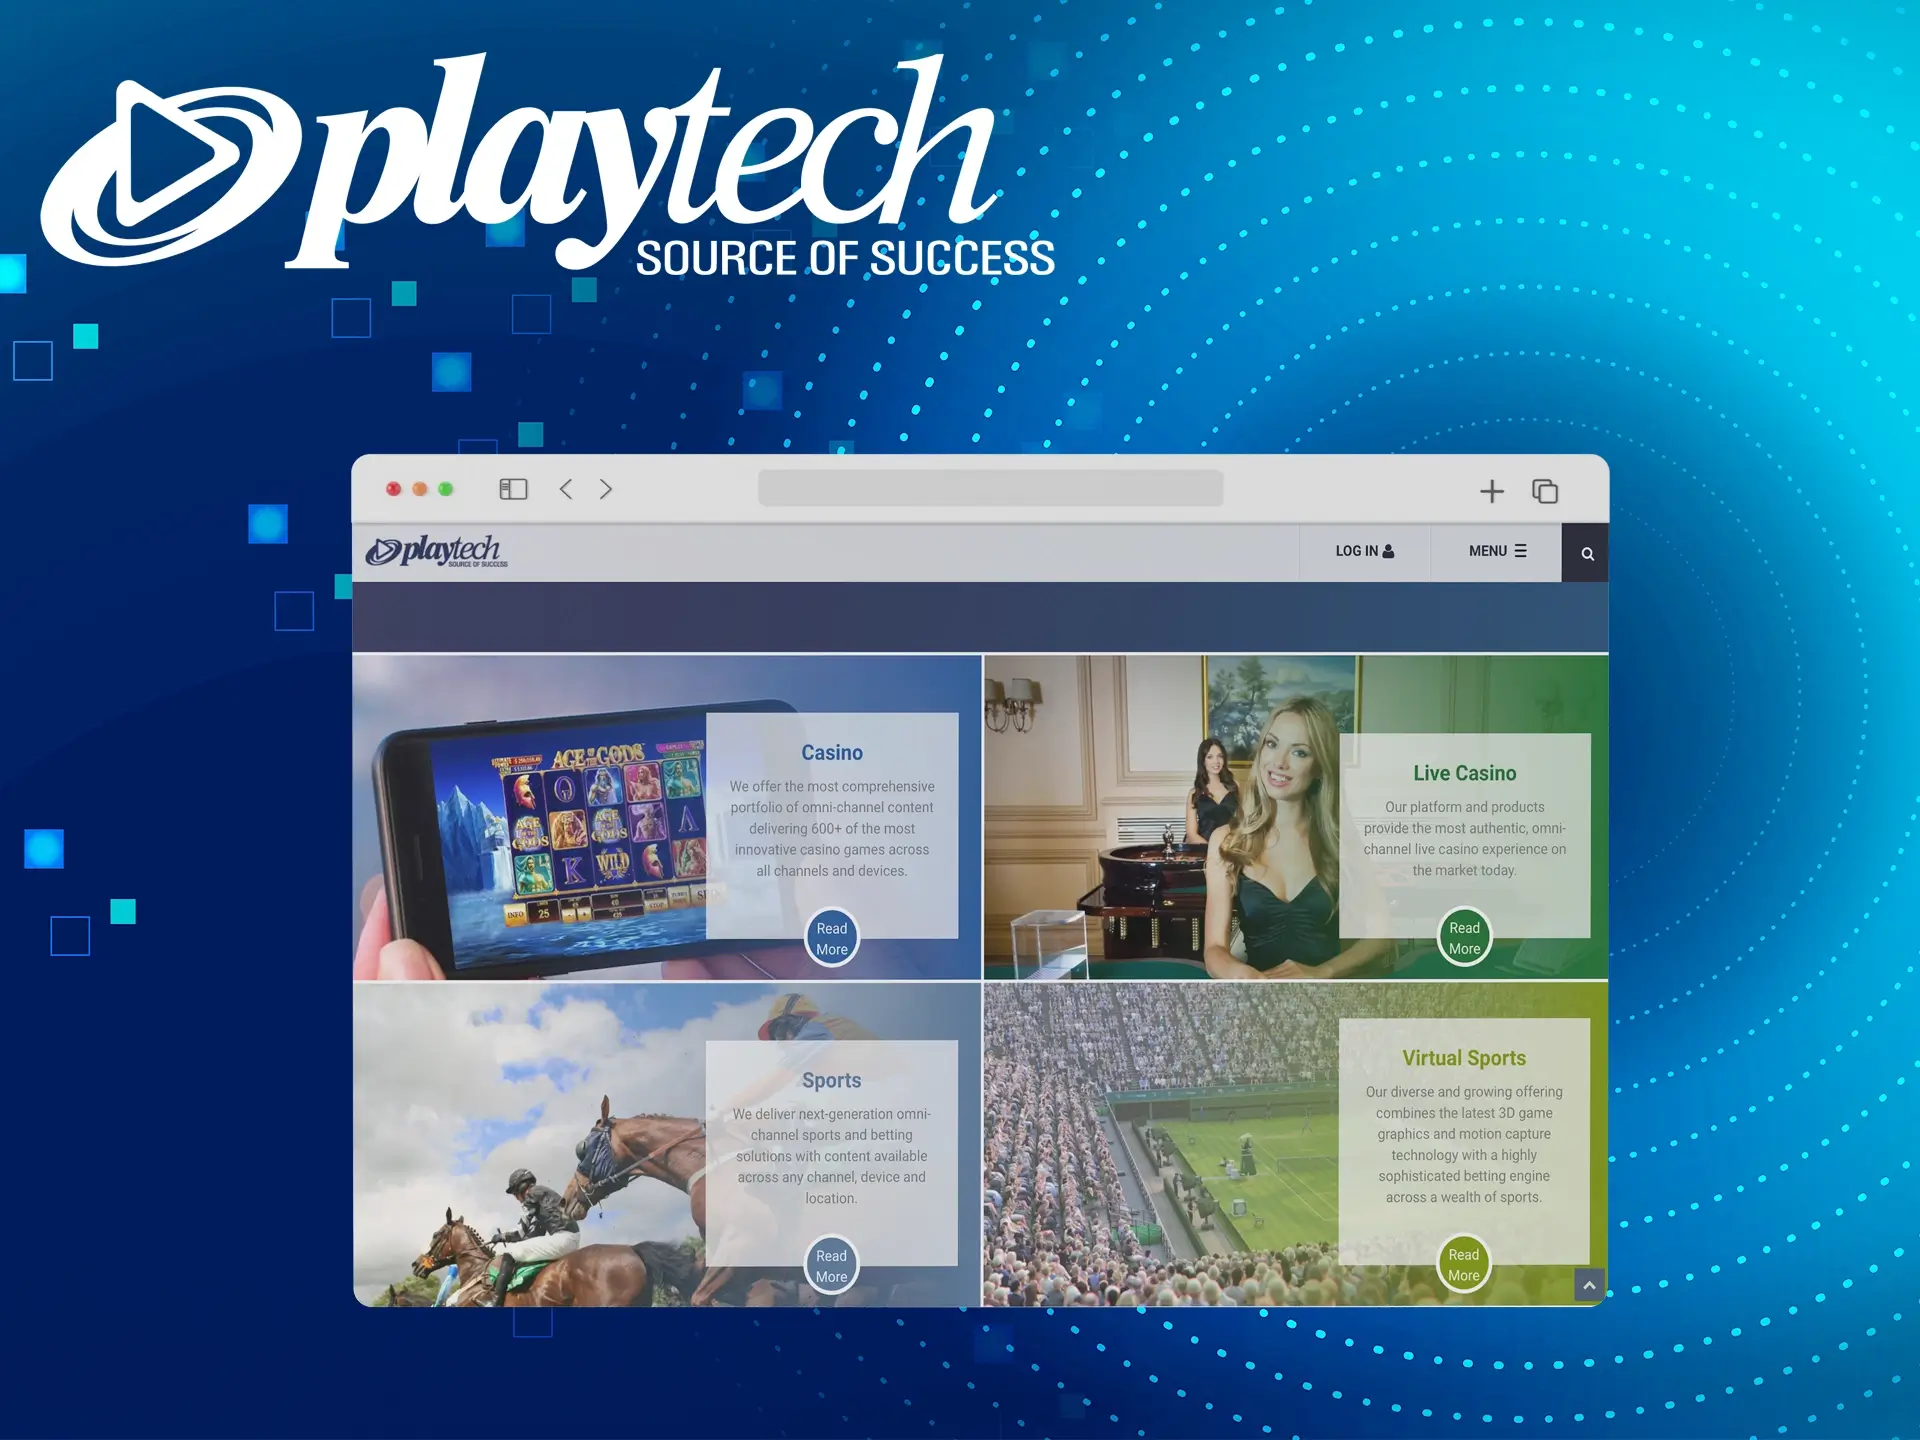 Playtech knows its business, play your favourite slots from any device.